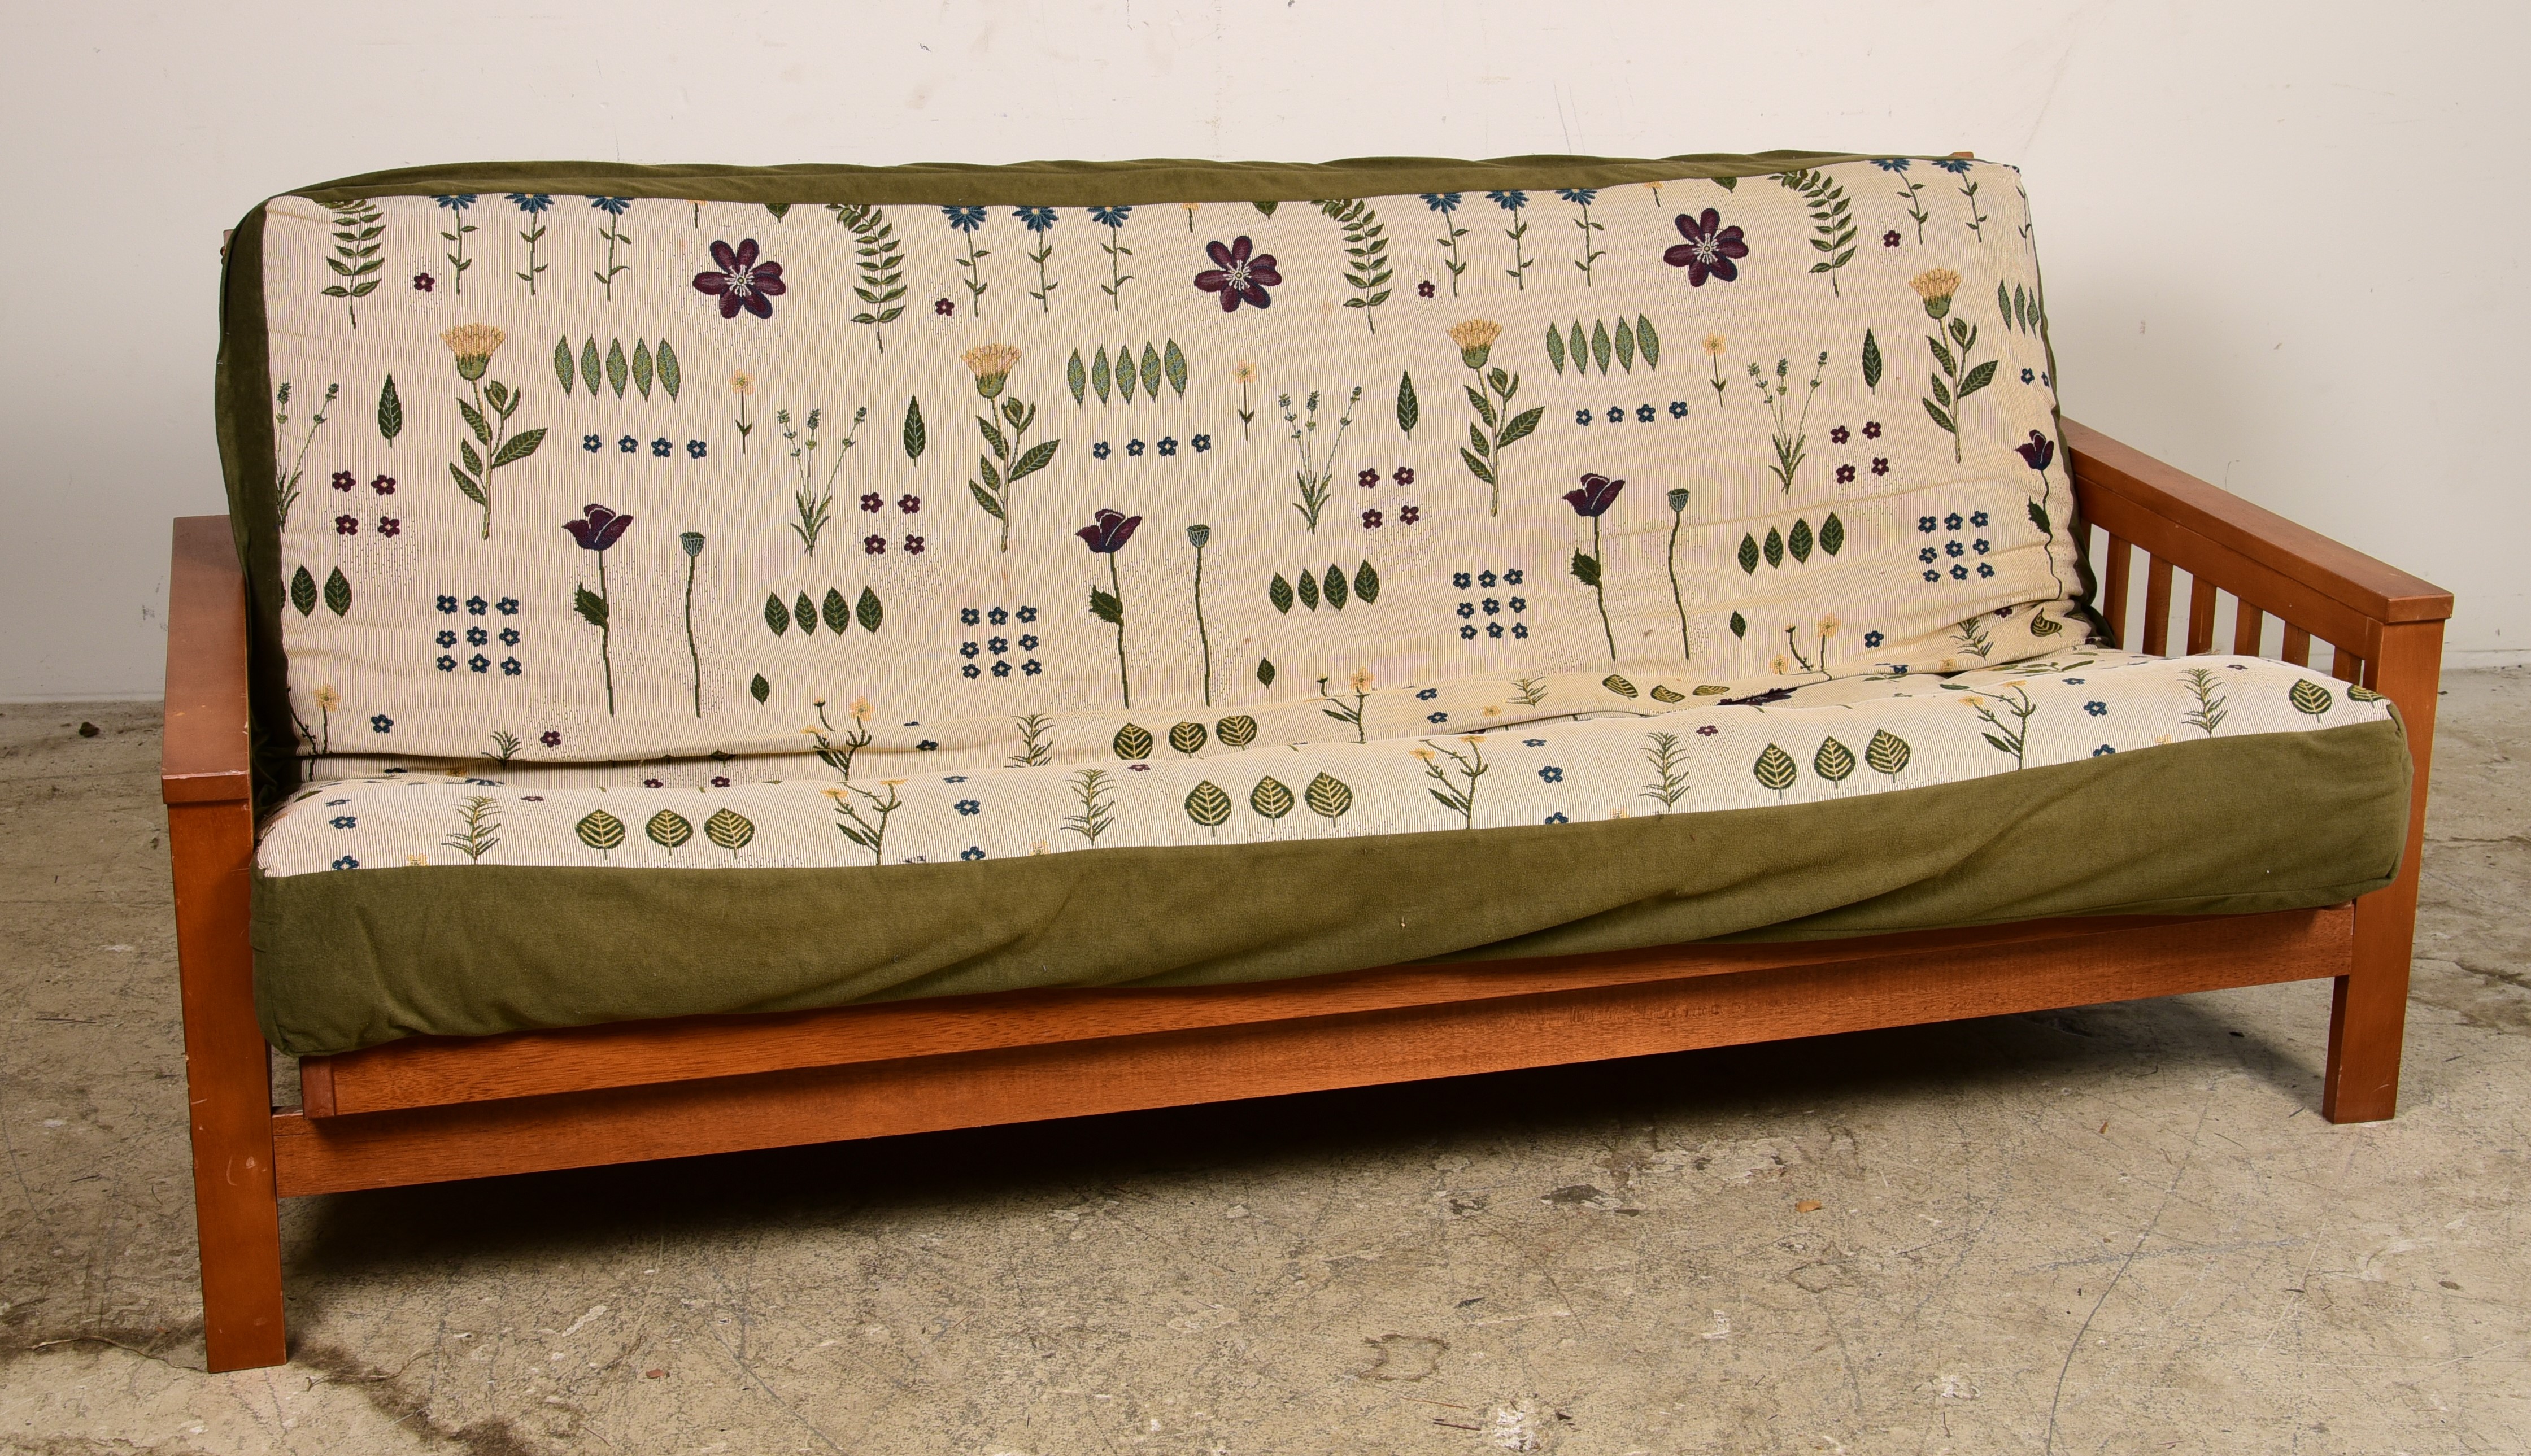 Contemporary futon, floral and